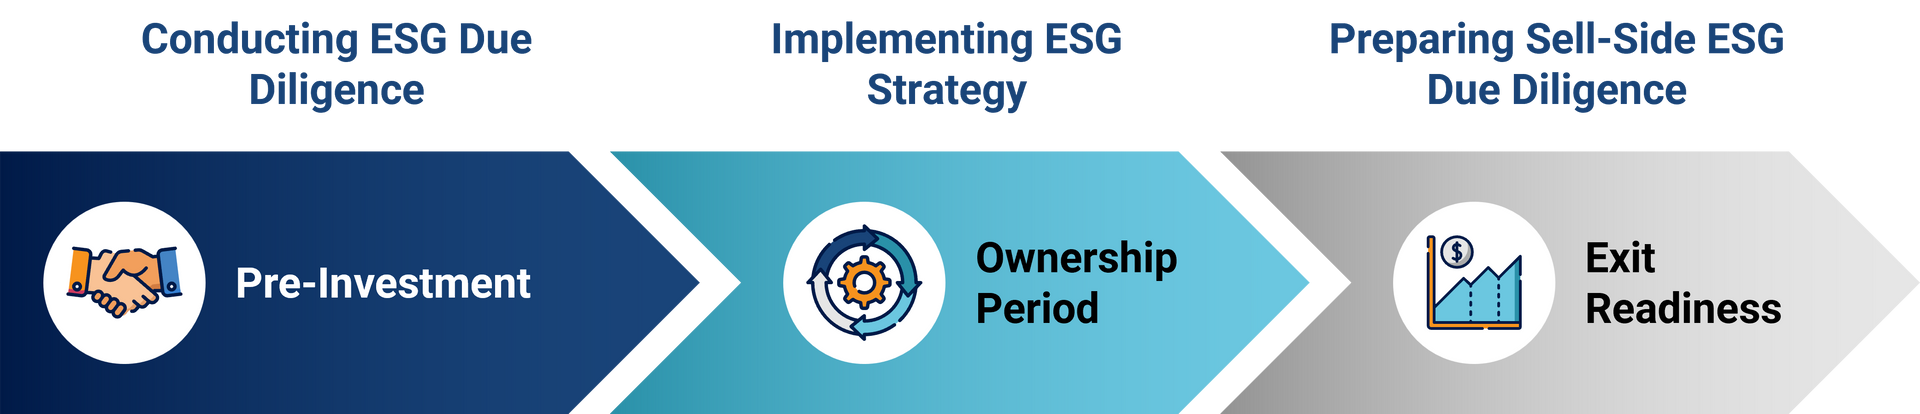 Graphic describing Stax's ESG approach: During the pre-investment period, Stax conducts ESG Due Diligence, during the ownership period, Stax assists in the implementation of ESG strategy, and during exit readiness, Stax prepares sell-side ESG due diligence.